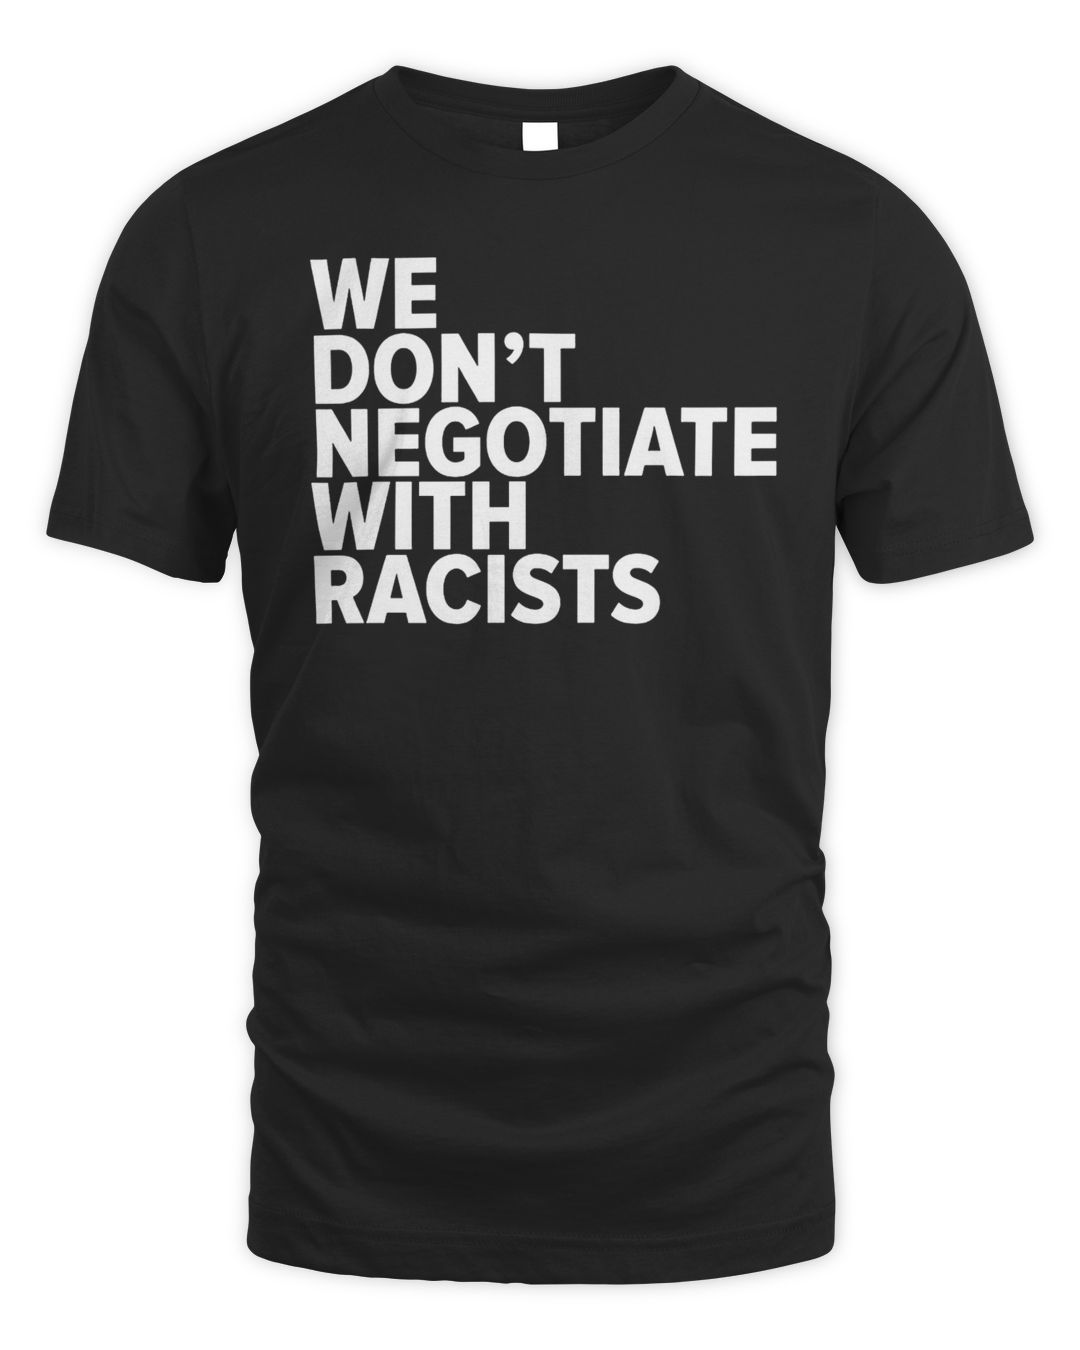 Tom Morello Merch We Dont Negotiate With Racists Shirt